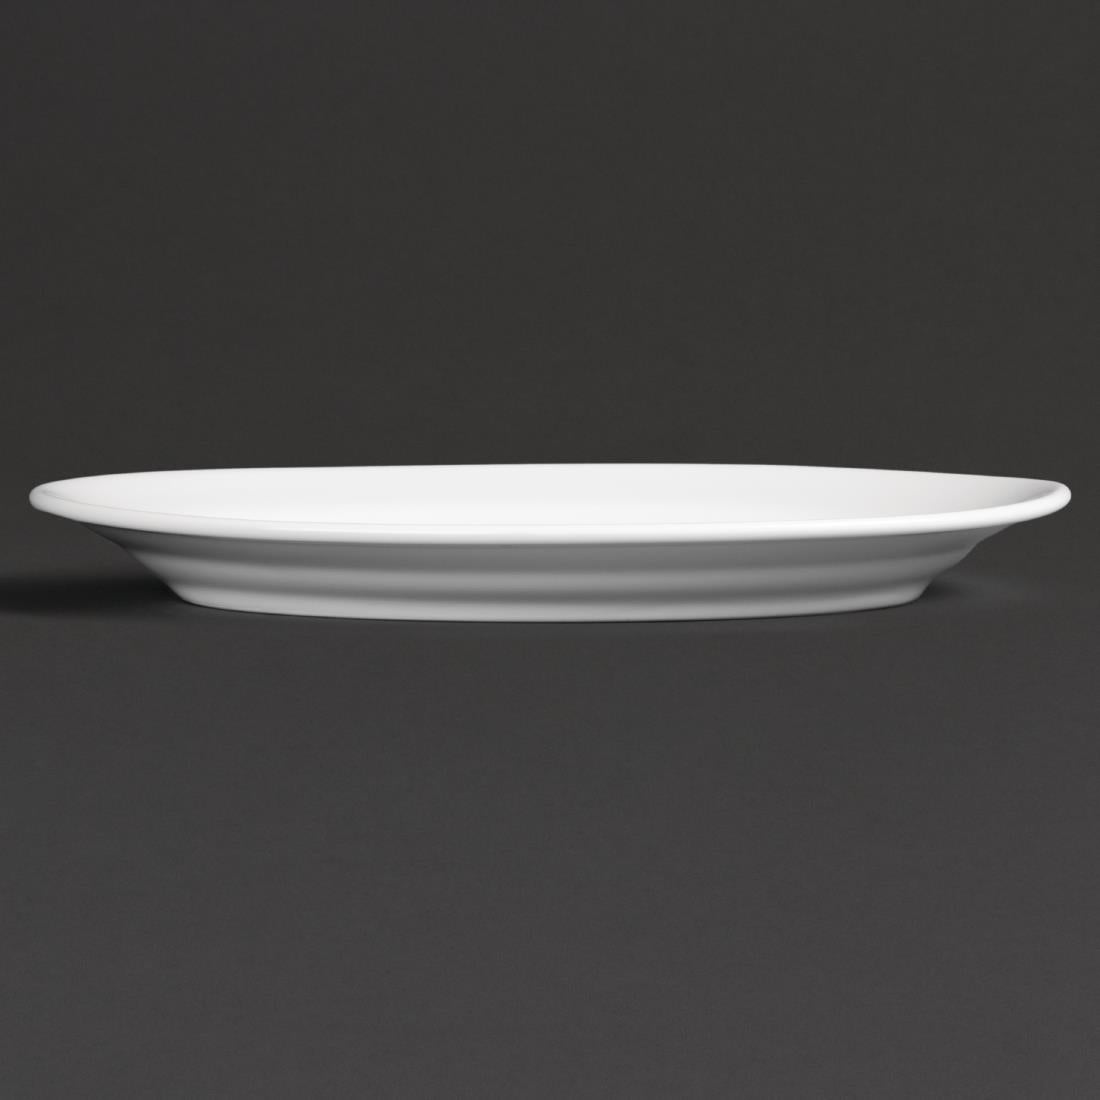 CG120 Royal Porcelain Oriental Oval Plates 230mm length (Pack of 12)